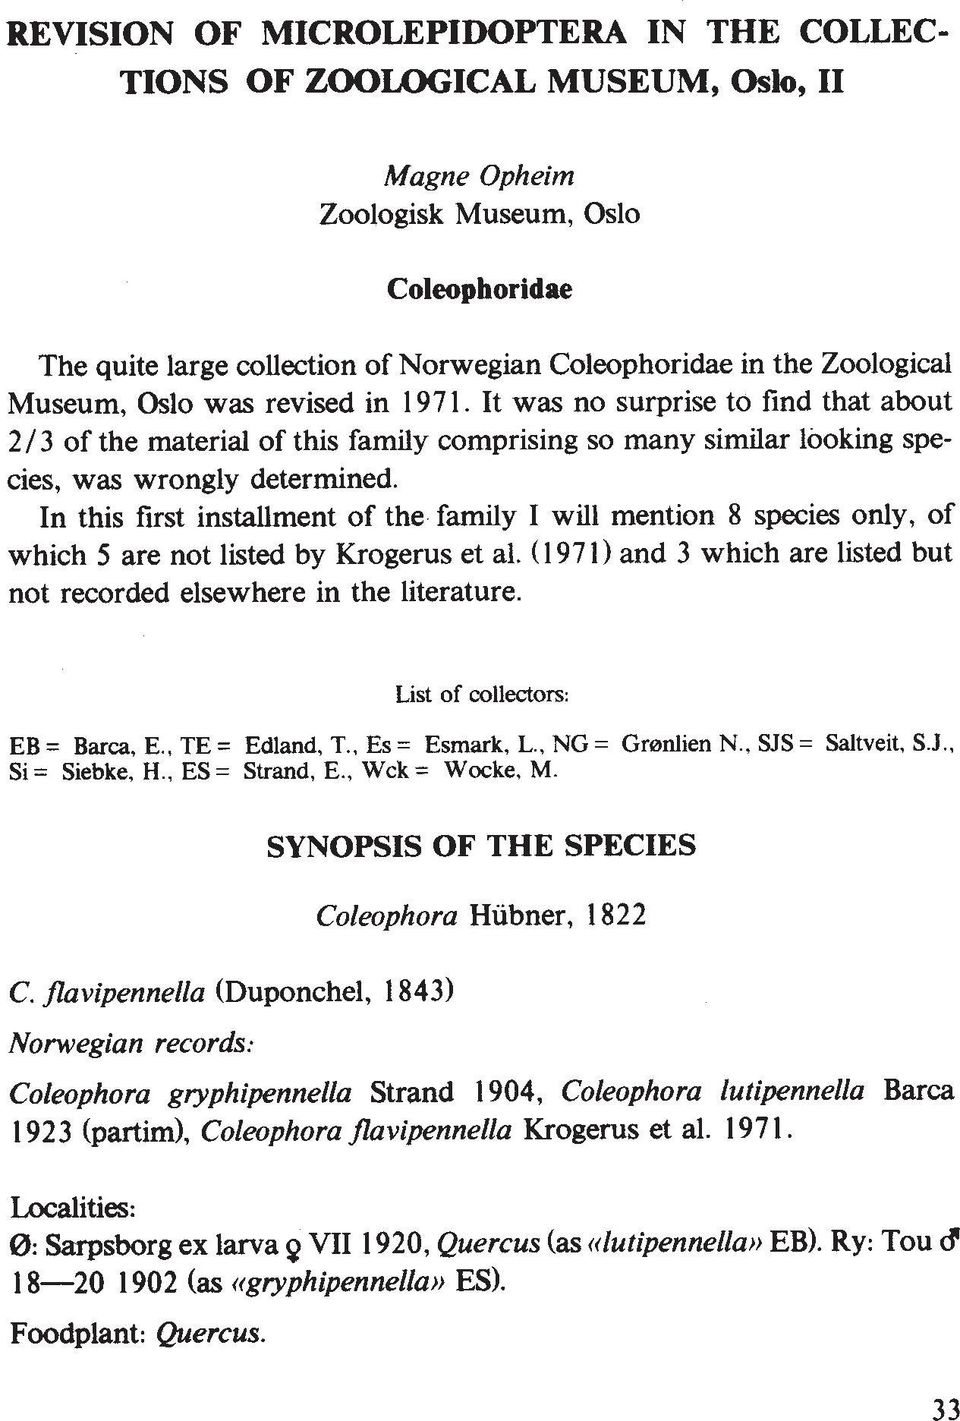 In this first installment of the family I will mention 8 species only, of which 5 are not listed by Krogerus et al. (1 97 1) and 3 which are listed but not recorded elsewhere in the literature.